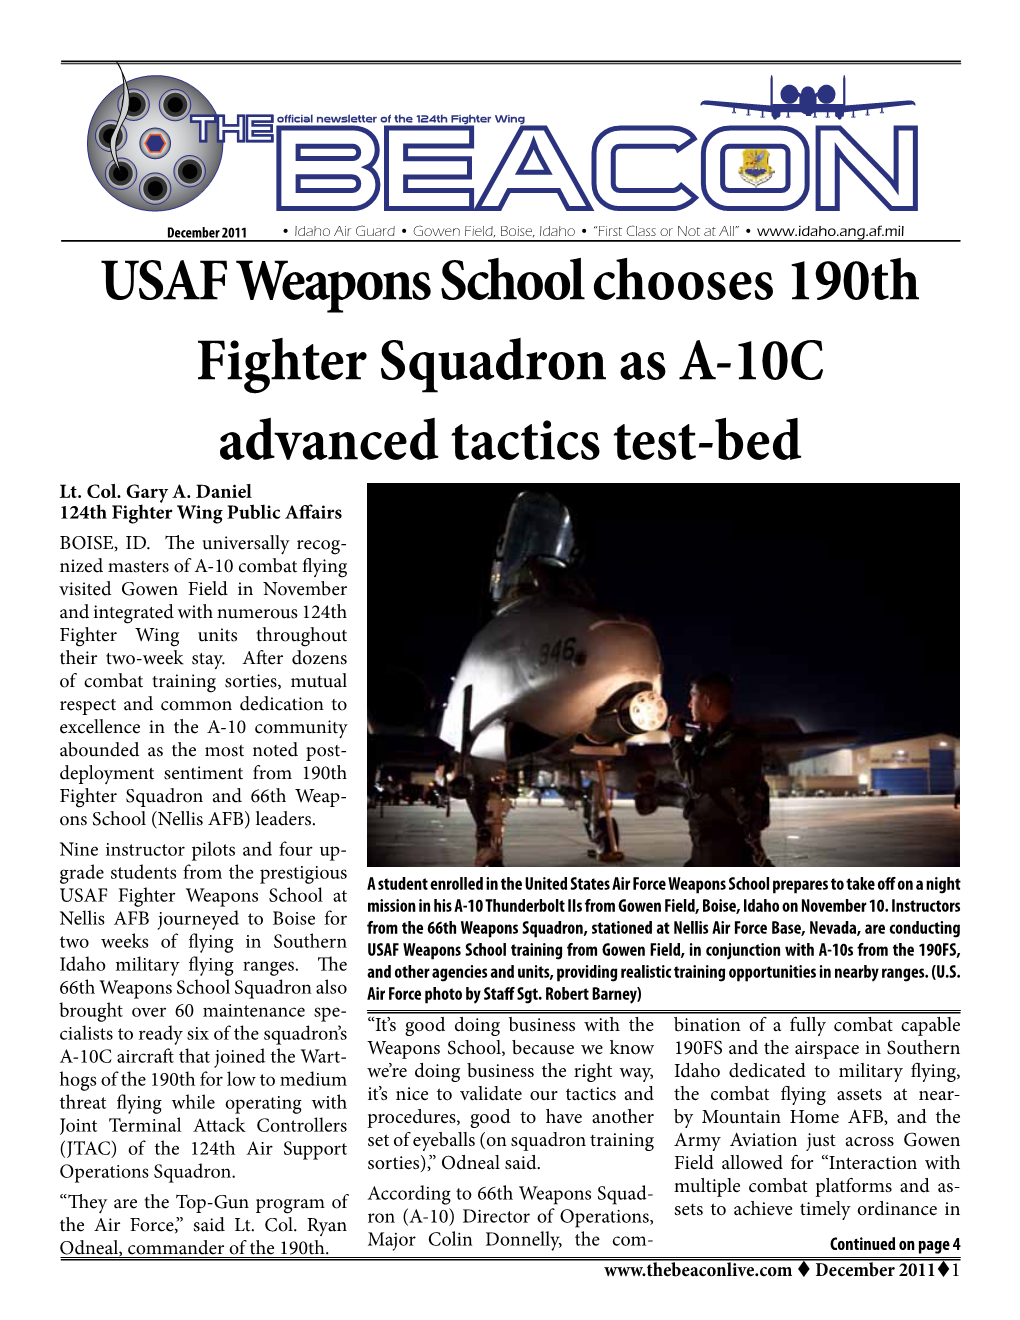 USAF Weapons School Chooses 190Th Fighter Squadron As A-10C Advanced Tactics Test-Bed Lt